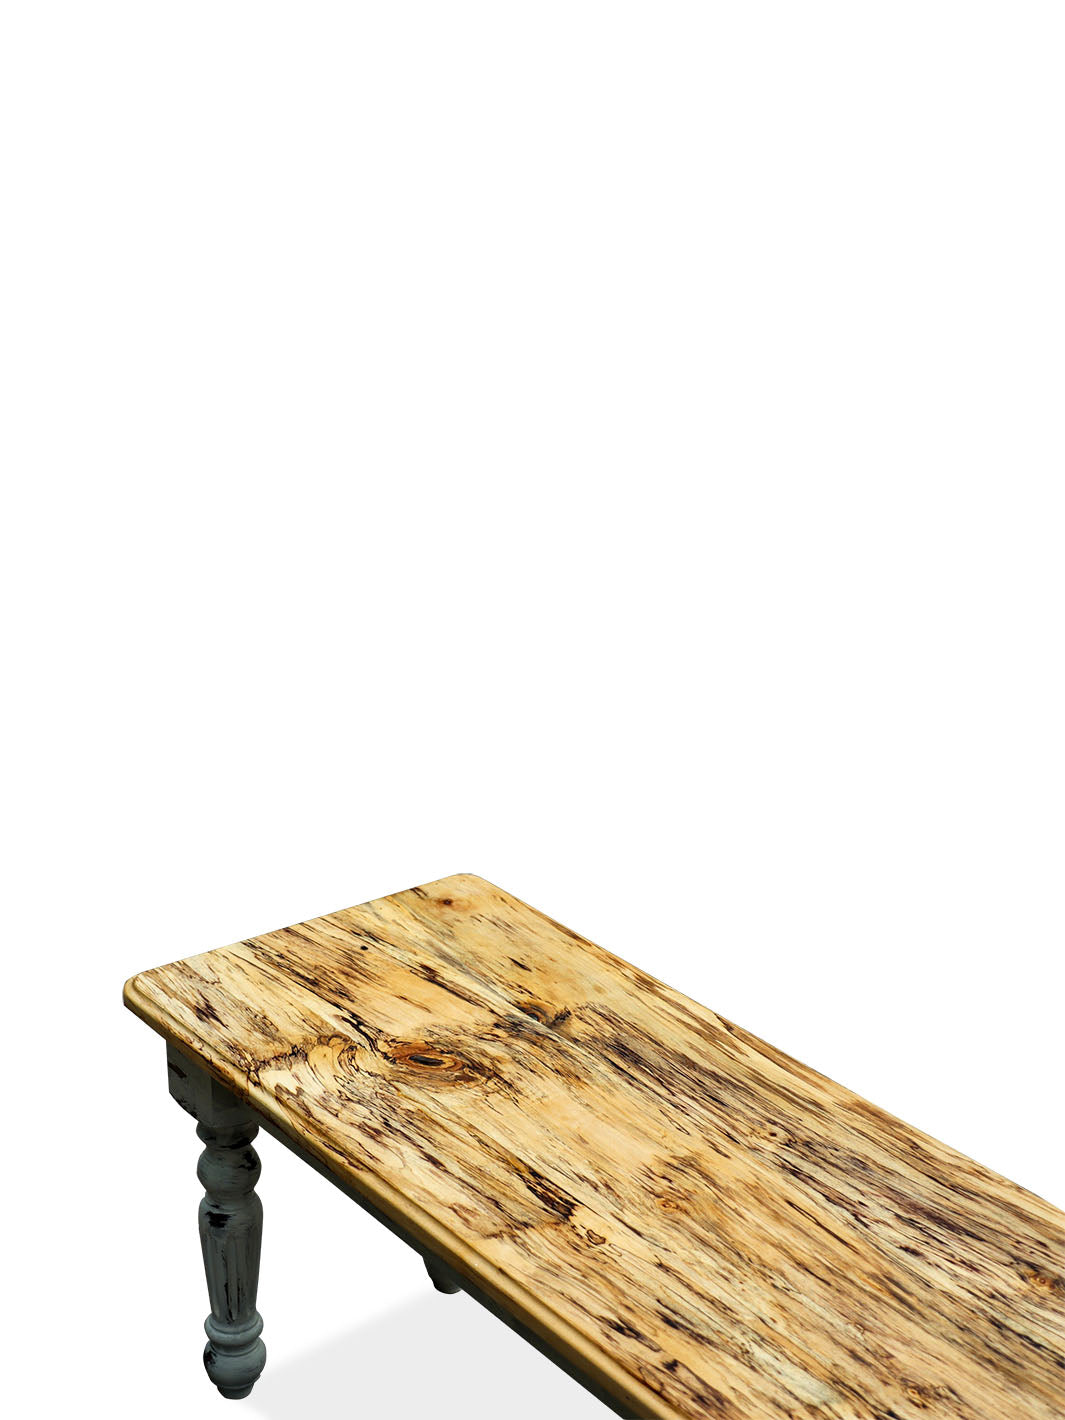 Spalted Maple Farmhouse Bench with White-Distressed Paint Earthly Comfort Dining Tables 180-1